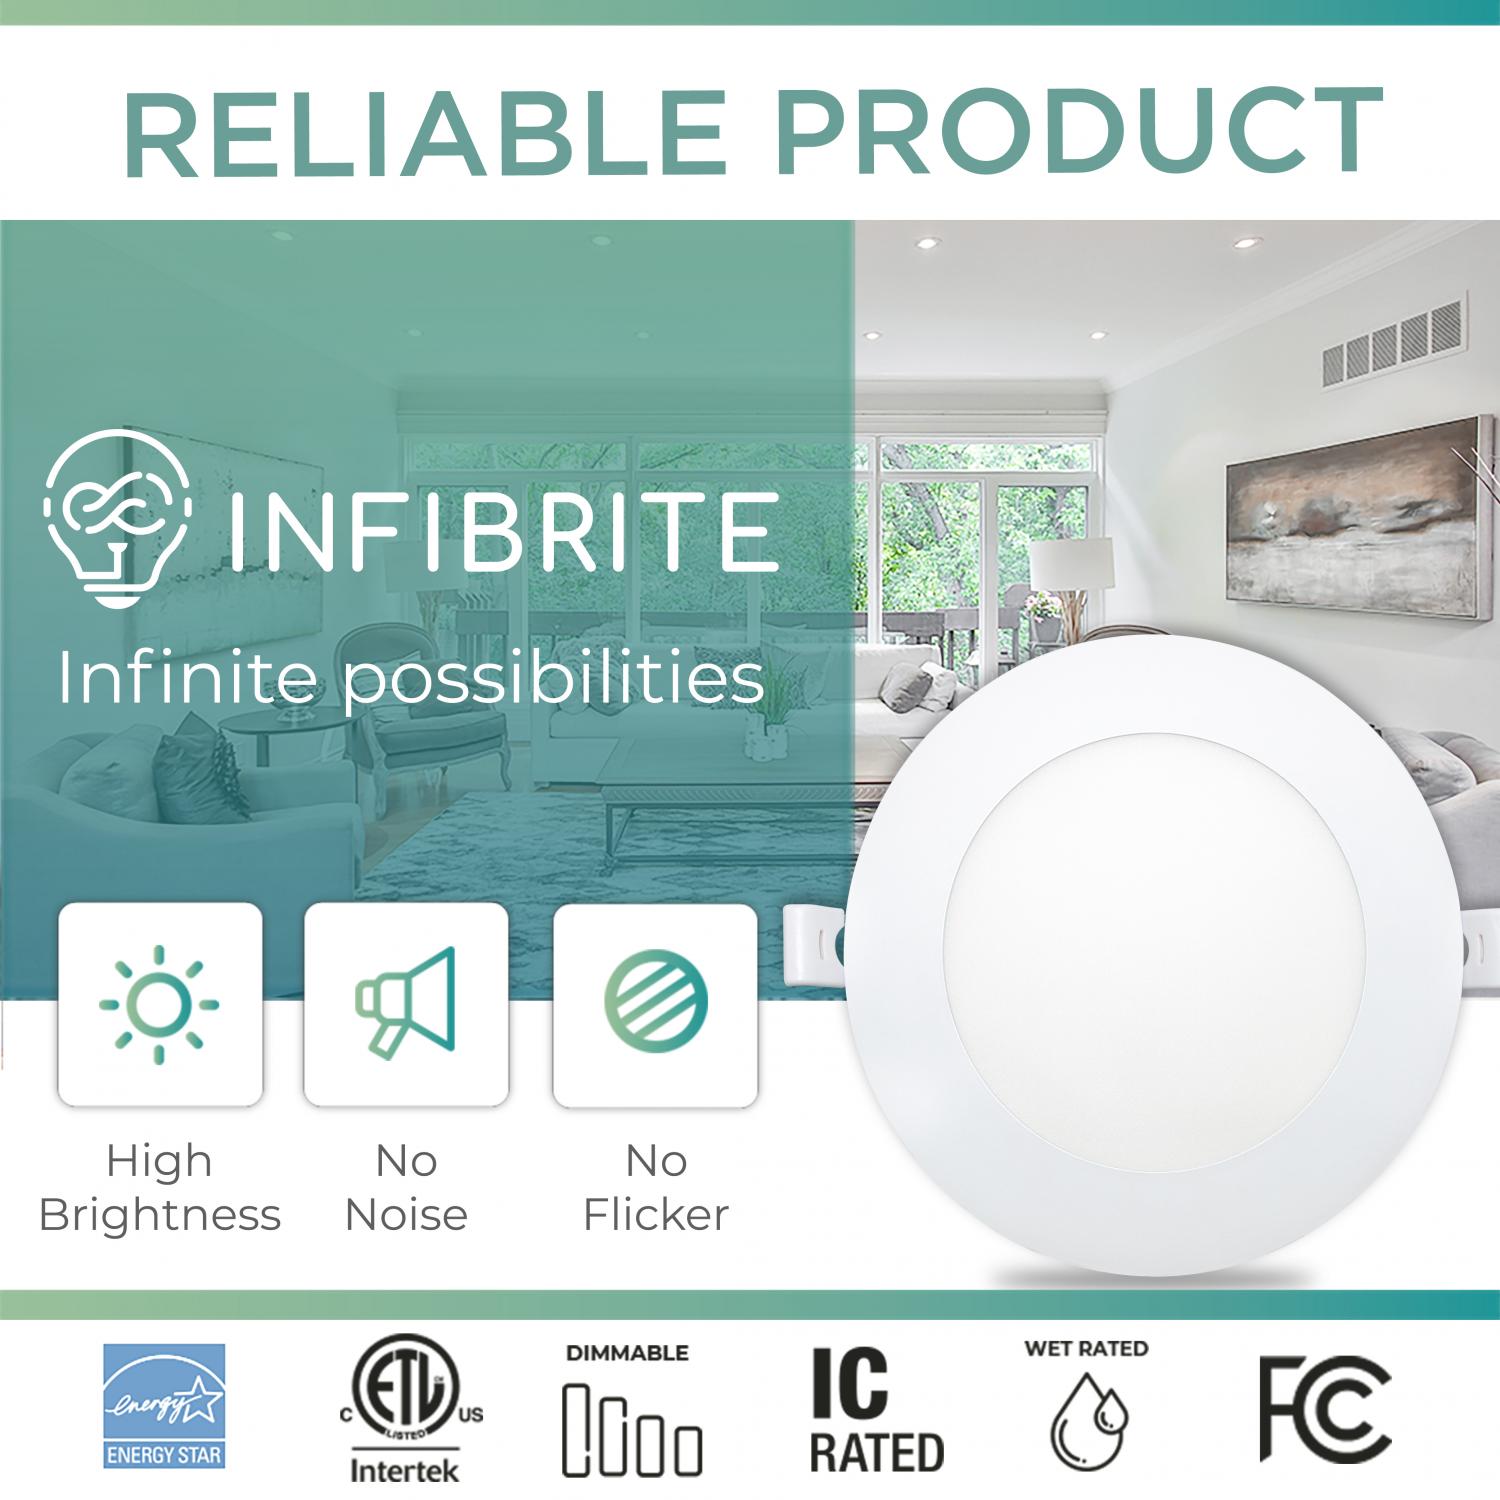 Infibrite 4 Inch 2700K Soft White 9W 750 LM Ultra-Slim LED Ceiling Light with Junction Box, Flush Mount, Dimmable, Fixture for Bedroom, Wet Rated for Bathroom Easy Install, 9W 75W, ETL & Energy Star, US Company (24 Pack)